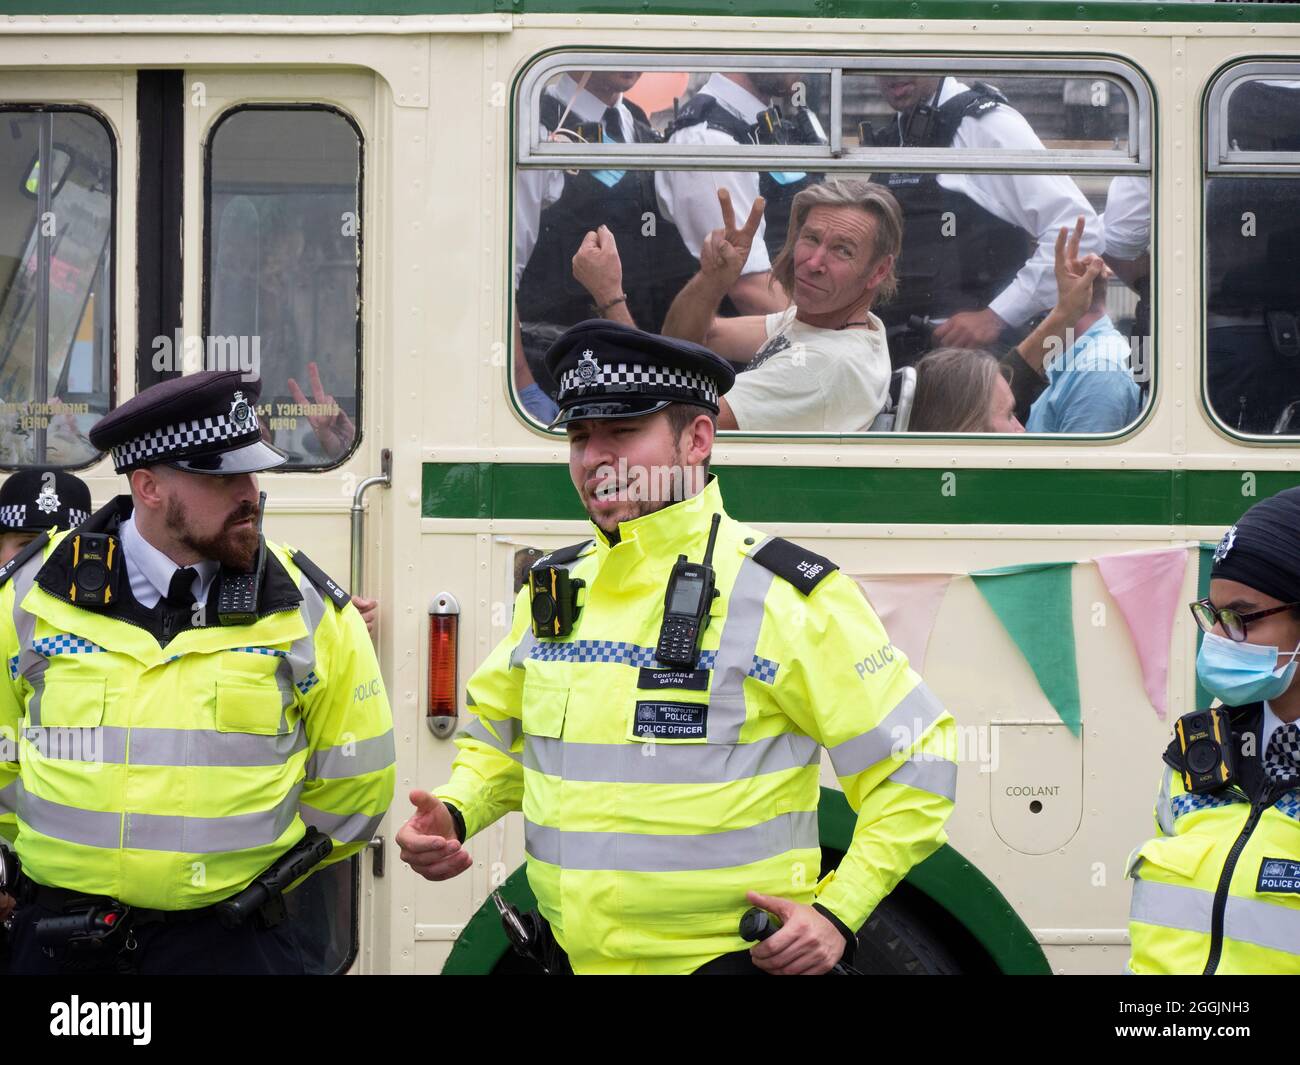 Extinction Rebellion activists London 31 August 2021. Protesters block London Bridge with a bus as part of ongoing XR, protests in London, while police officers guard bus with demonstrators on board Stock Photo